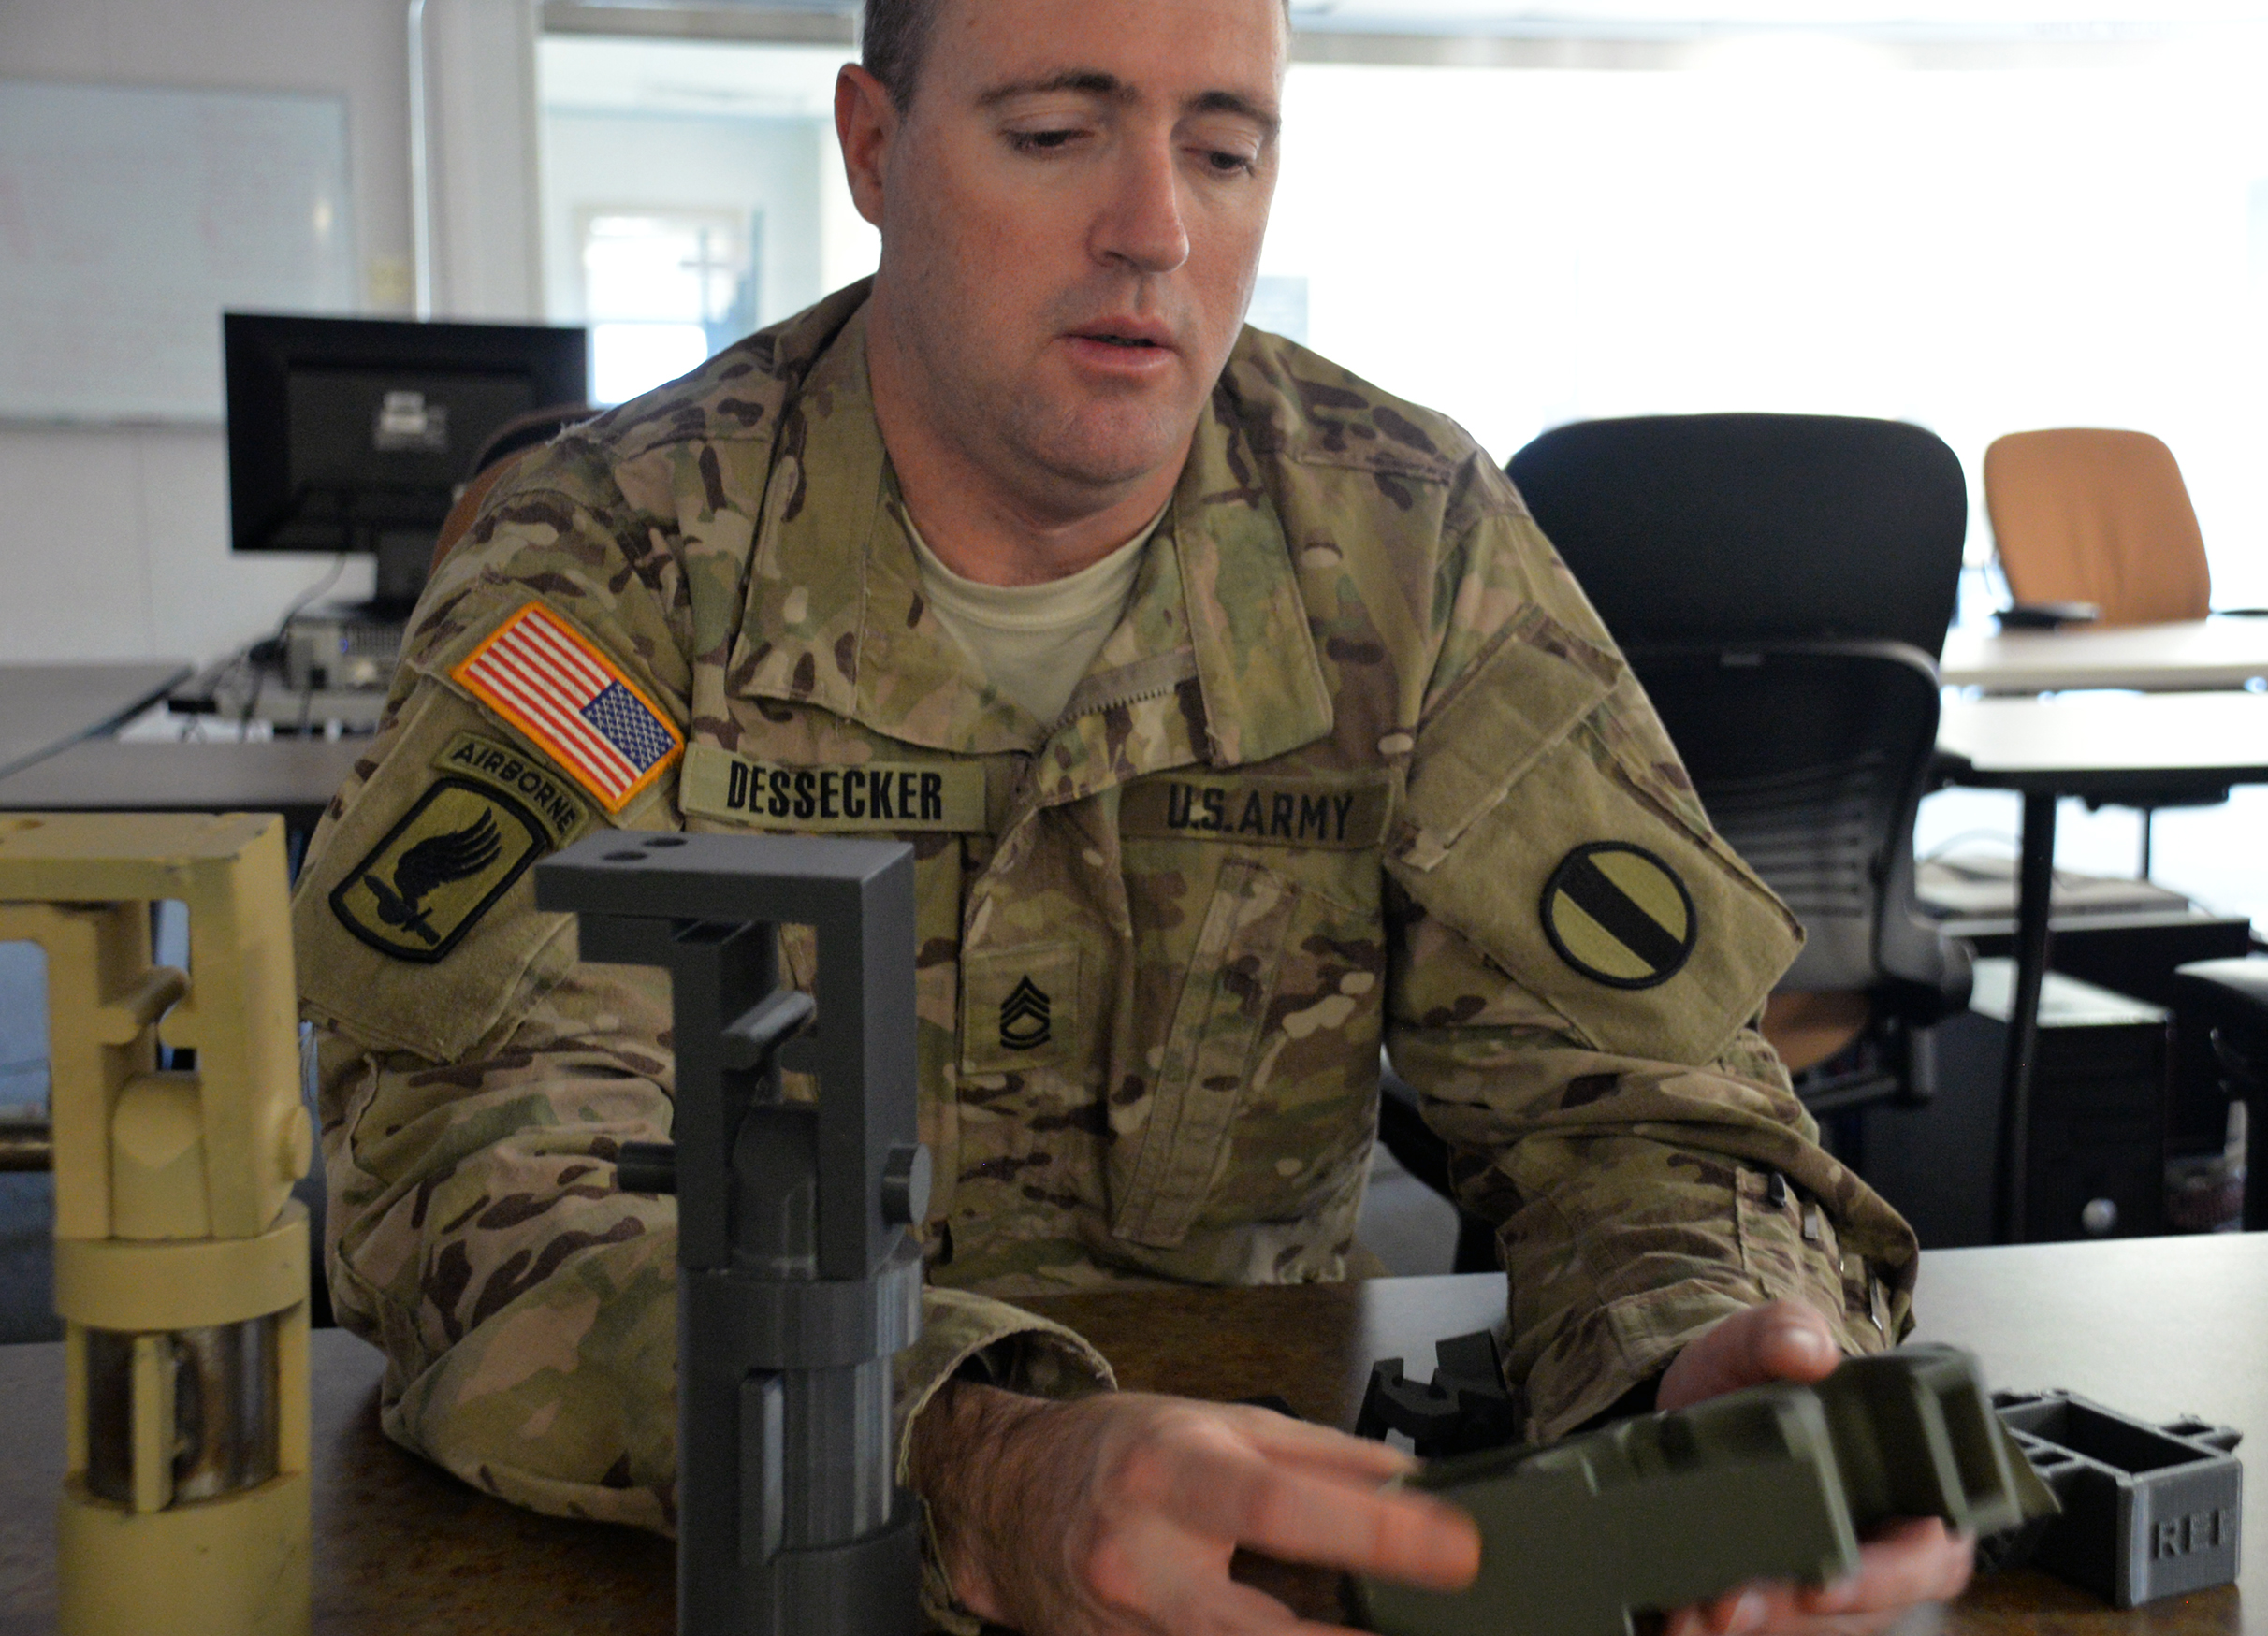 Sgt. 1st Class Michael Wayne Dessecker, an operational advisor for the Rapid Equipping Force’s outreach team, says Ex Lab projects are often first developed into a working plastic version from 3D printers in order to cut down costs and to check its form, fit and function. (Photo by Martha C. Koester / NCO Journal)